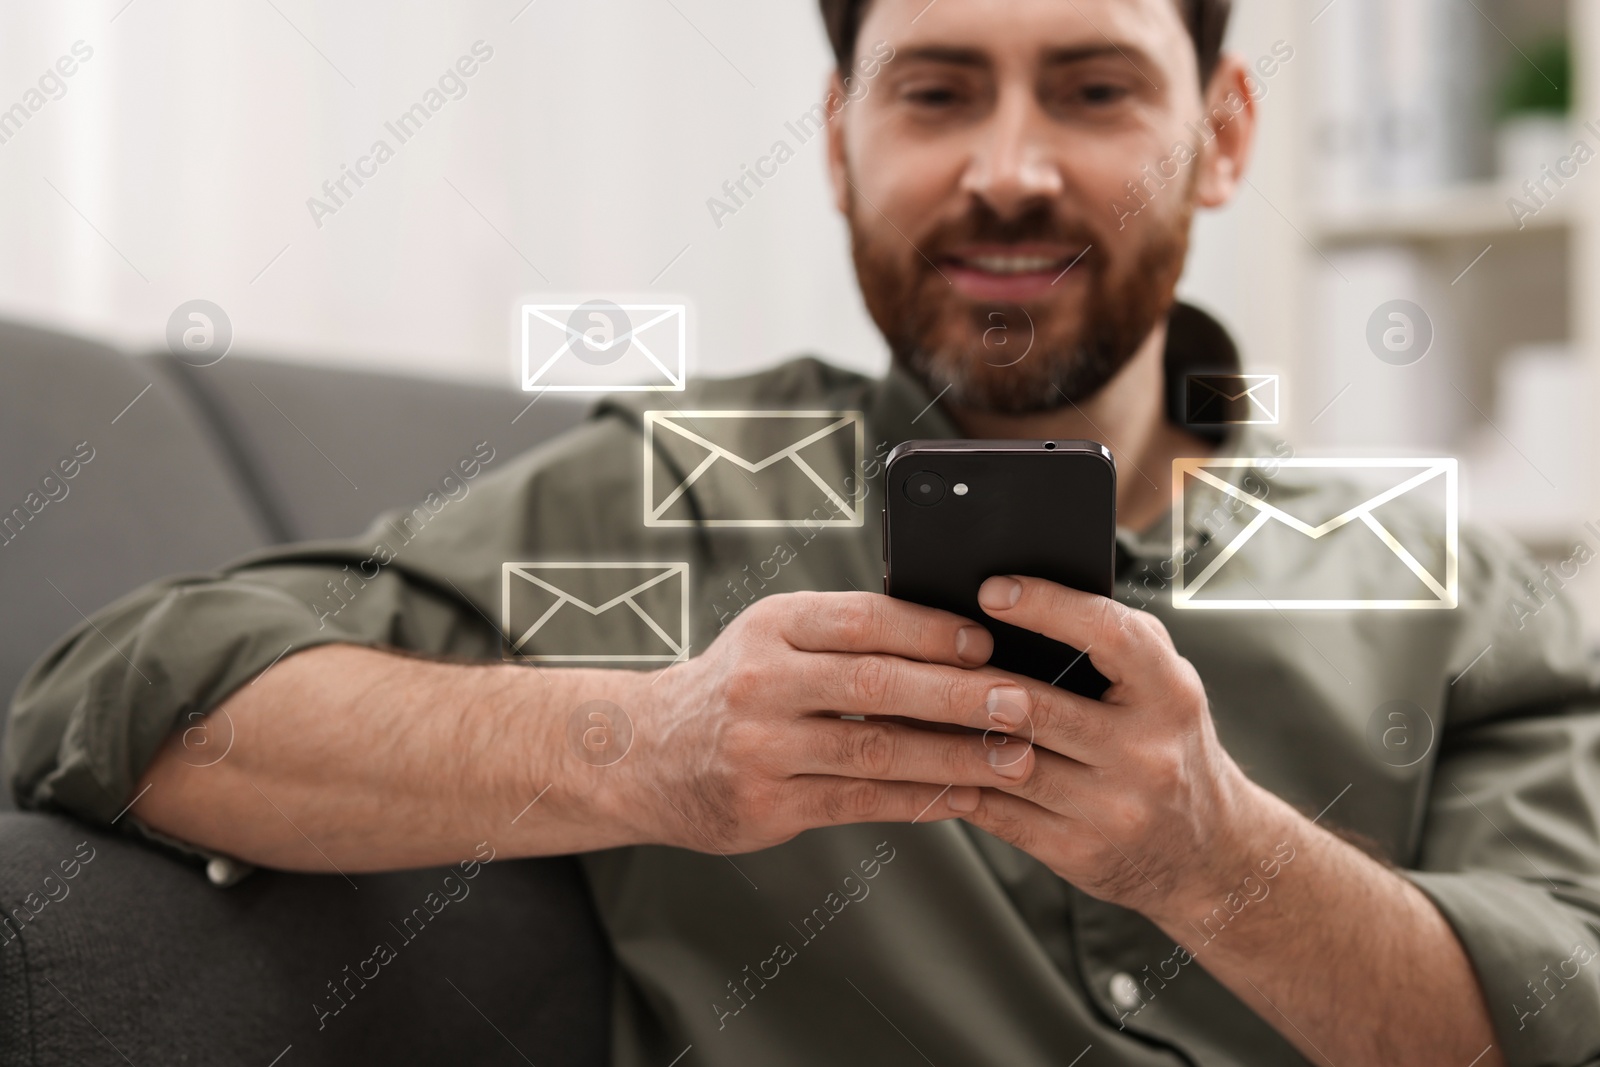 Image of Smiling man with smartphone chatting indoors. Many illustrations of envelope as incoming messages around device